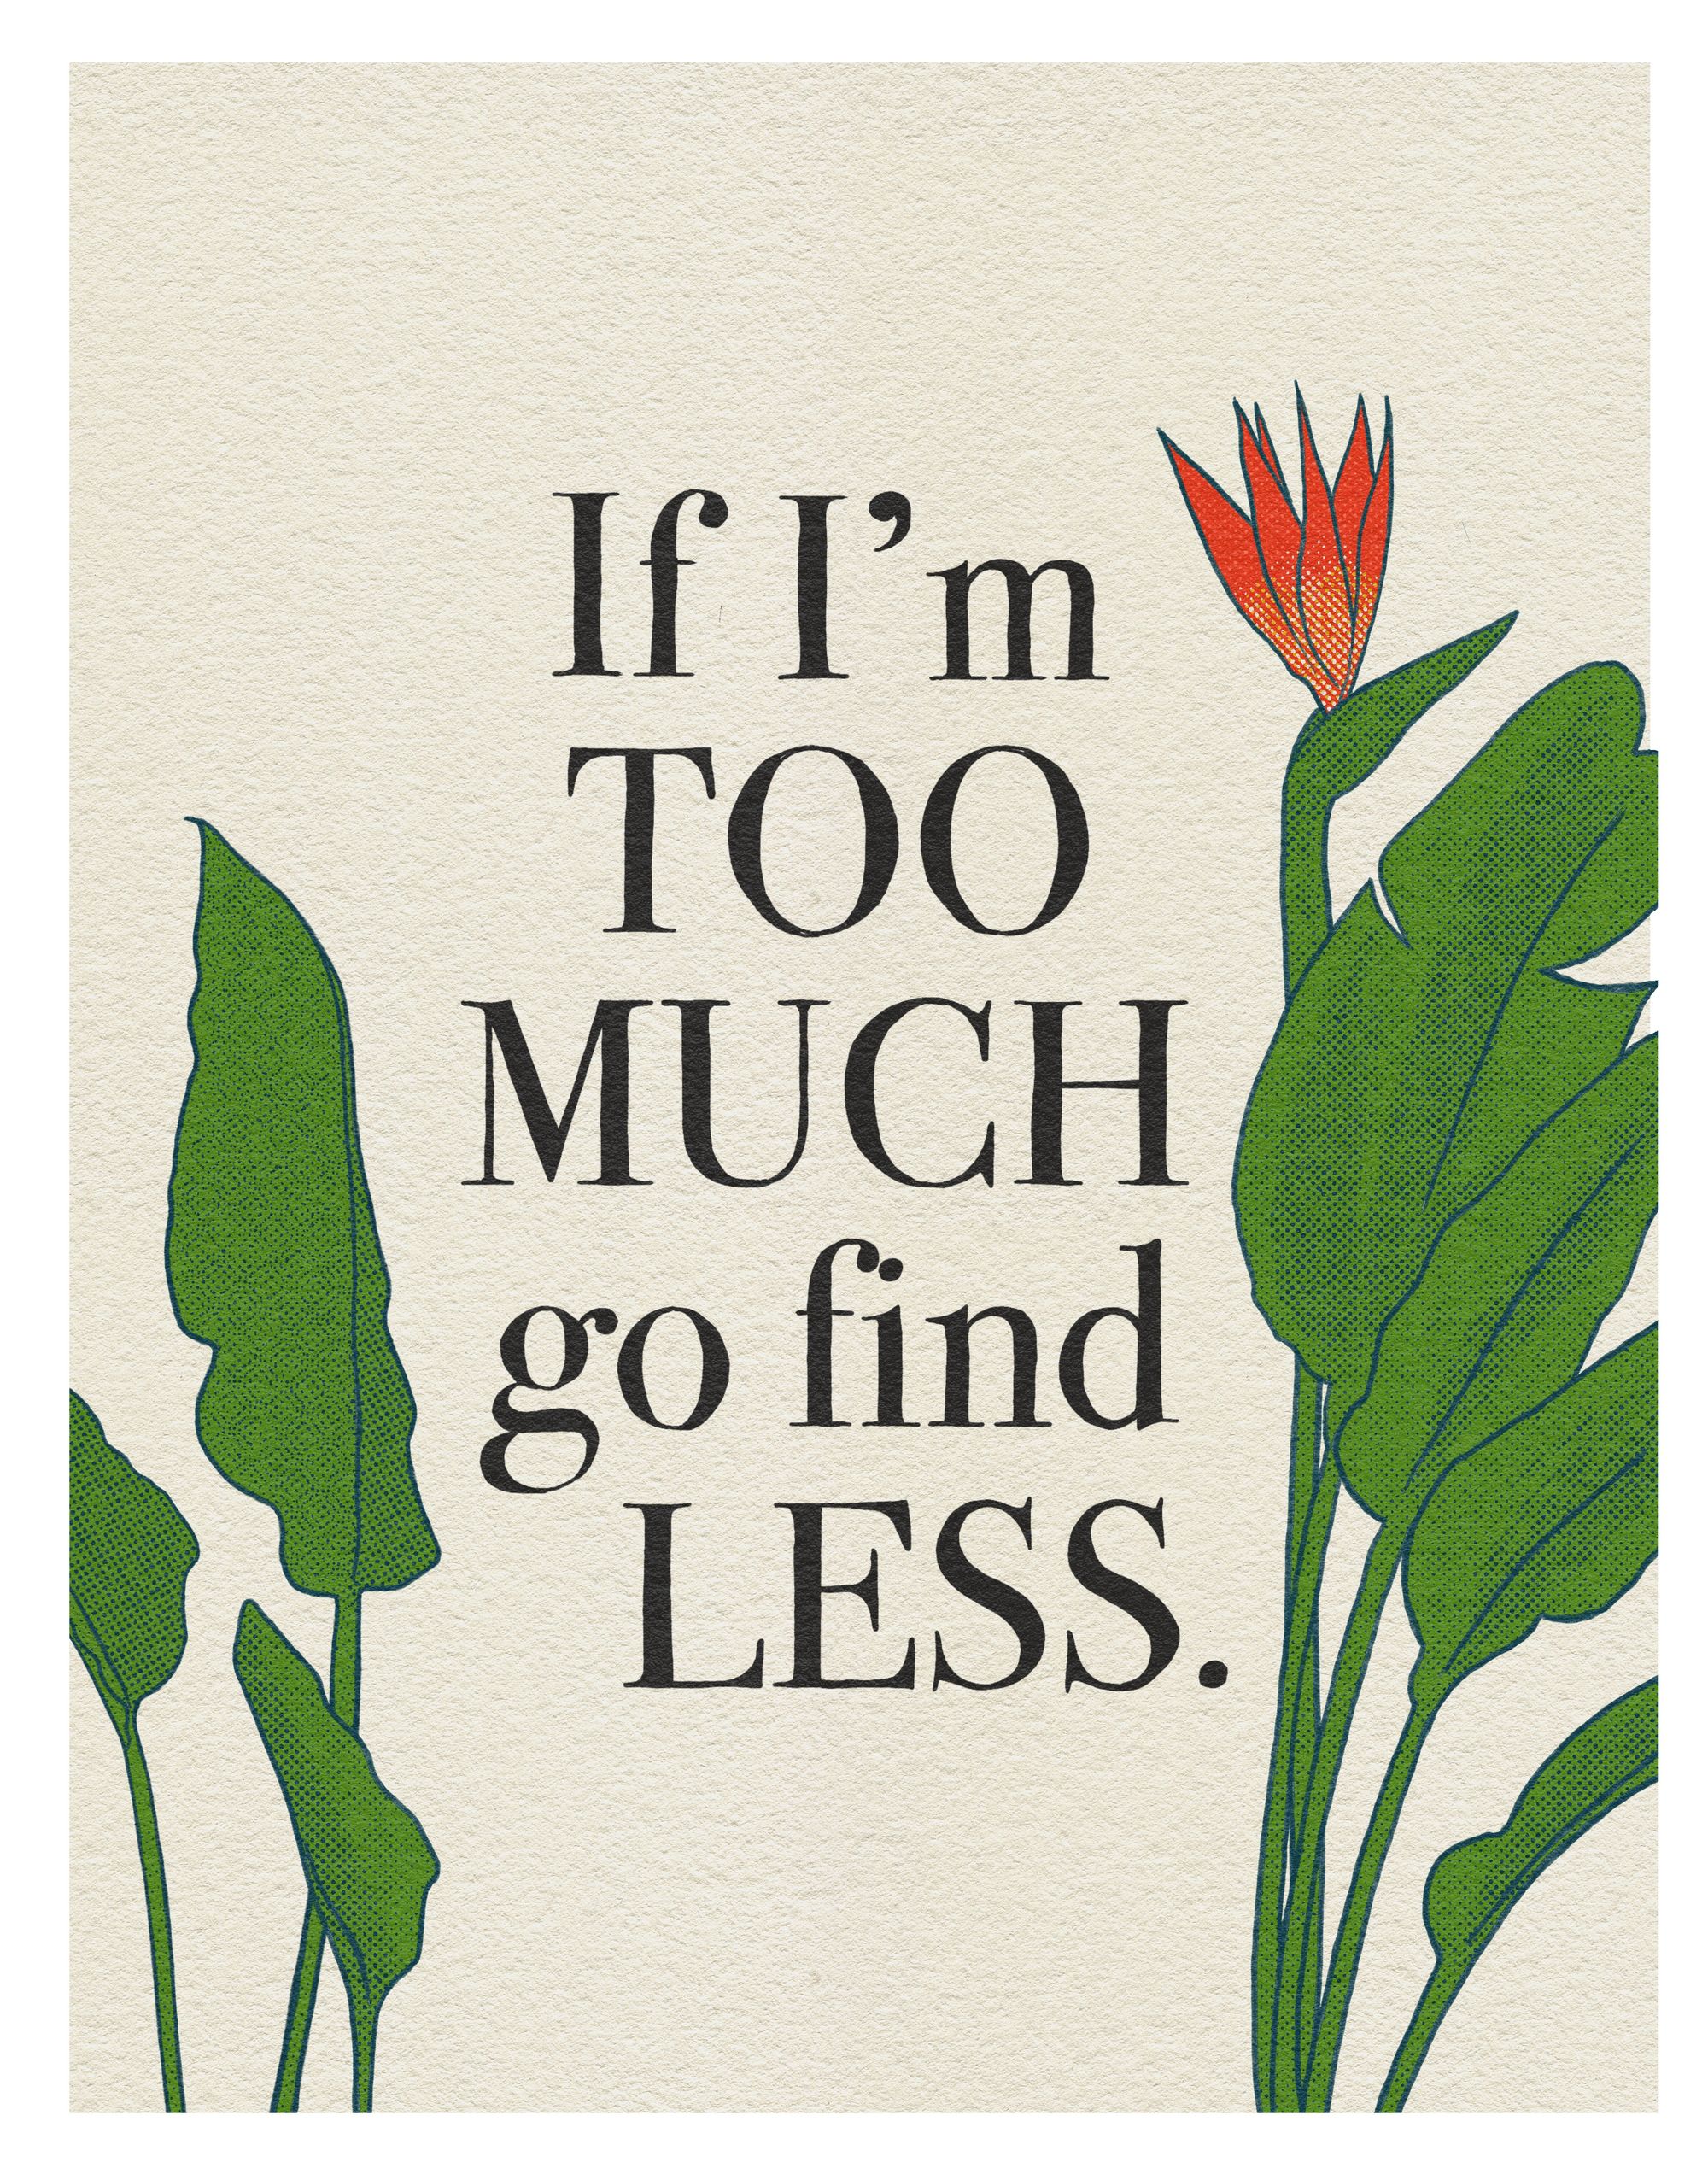 An image that reads "If I'm too much go find less." surrounded by Bird of Paradise leaves with one bright red flower